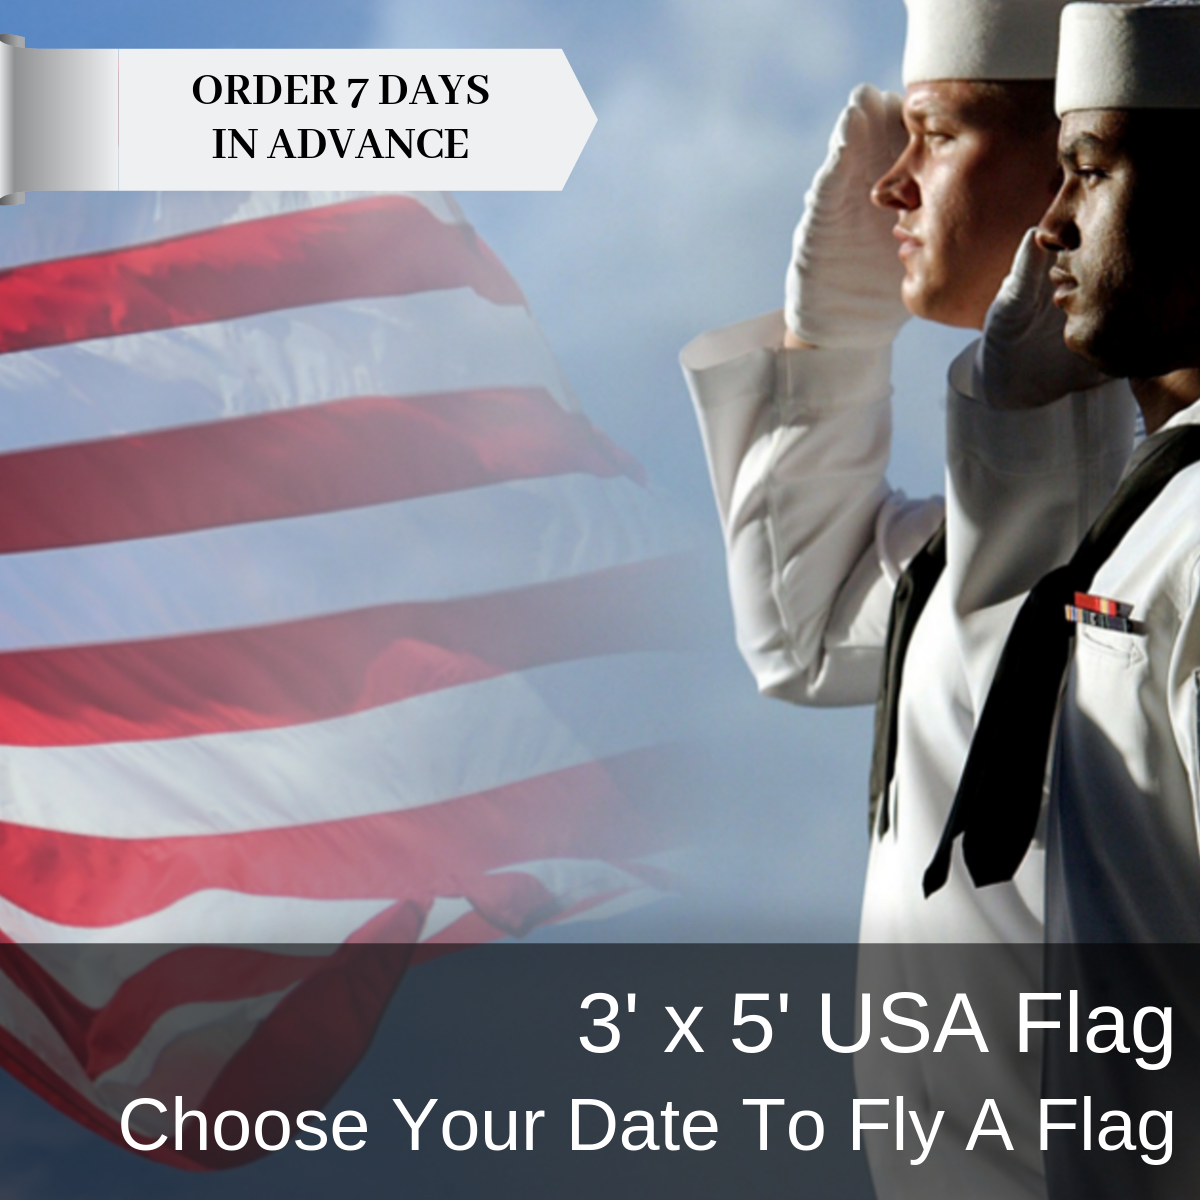 3x5 Choose Your Date USA Flag Flown On USS Arizona Memorial At Pearl Harbor